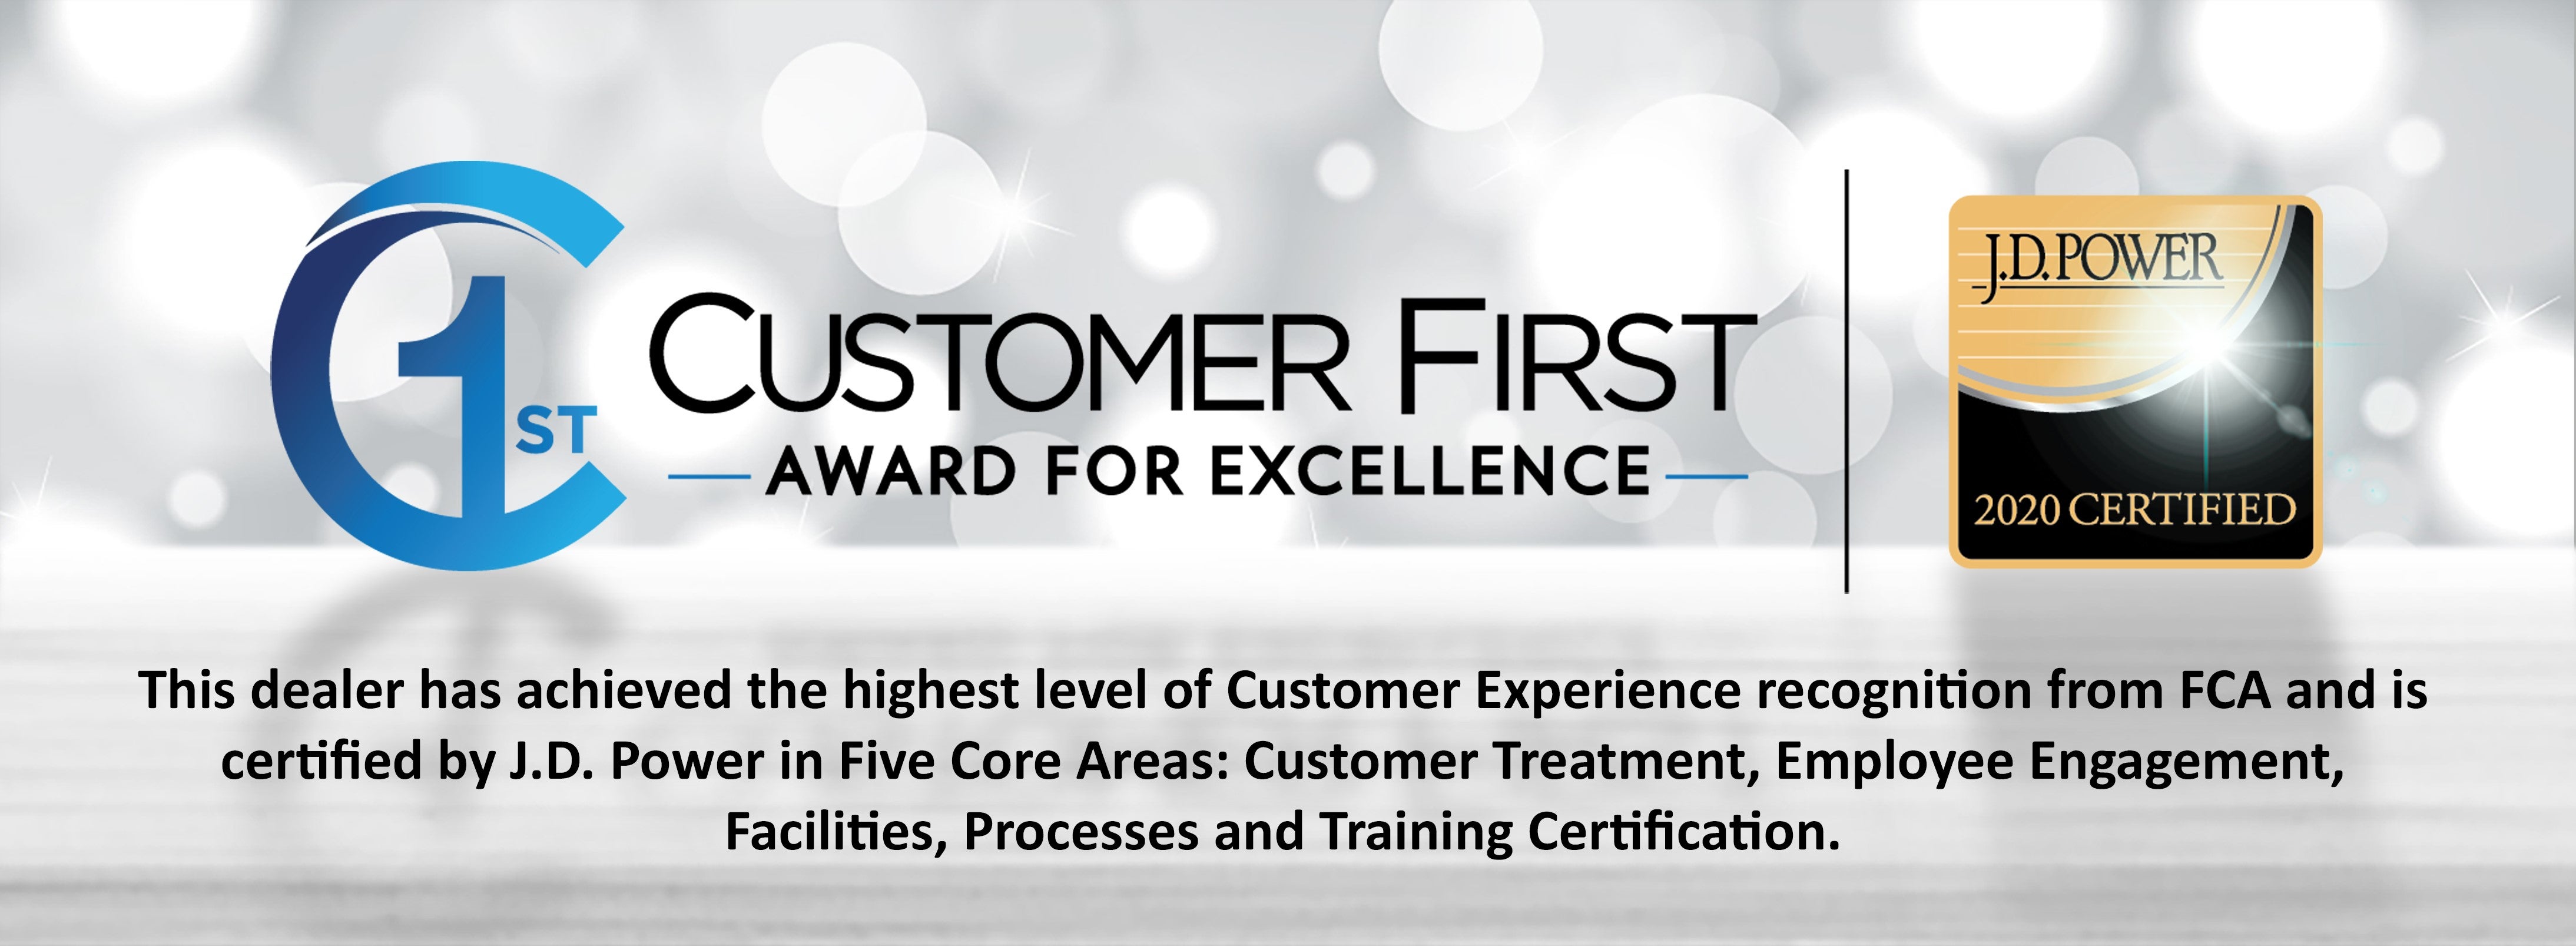 Customer First Award for Excellence for 2019 at Clint Bowyer Chrysler Dodge Jeep & Ram in Emporia, KS